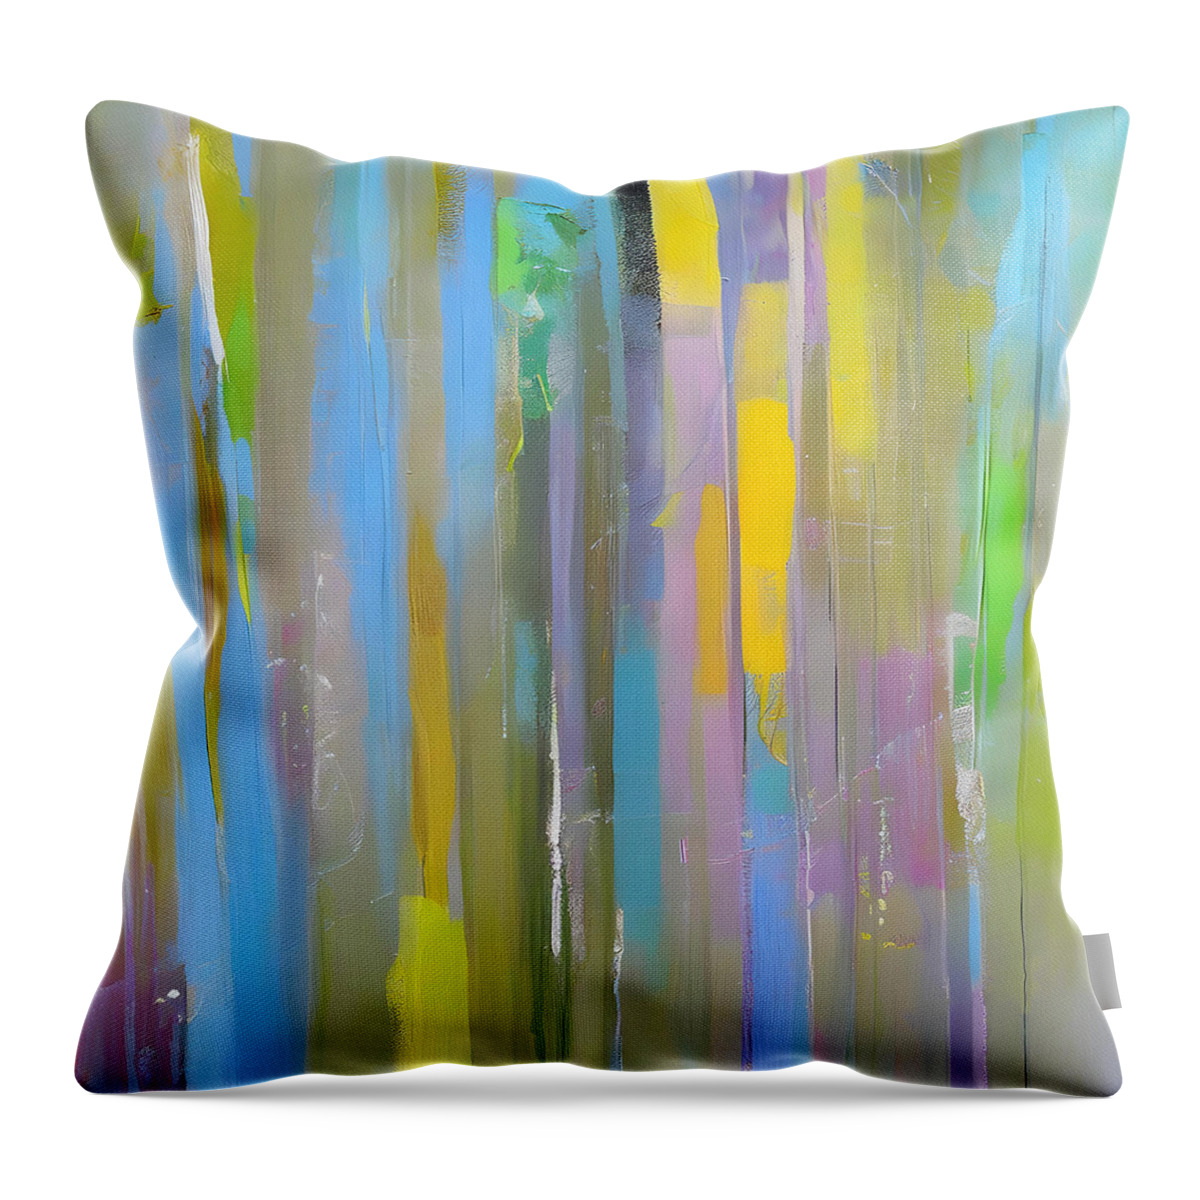 Abstract Throw Pillow featuring the painting Colorful Bright Modern Linear Abstract by Abstract Factory